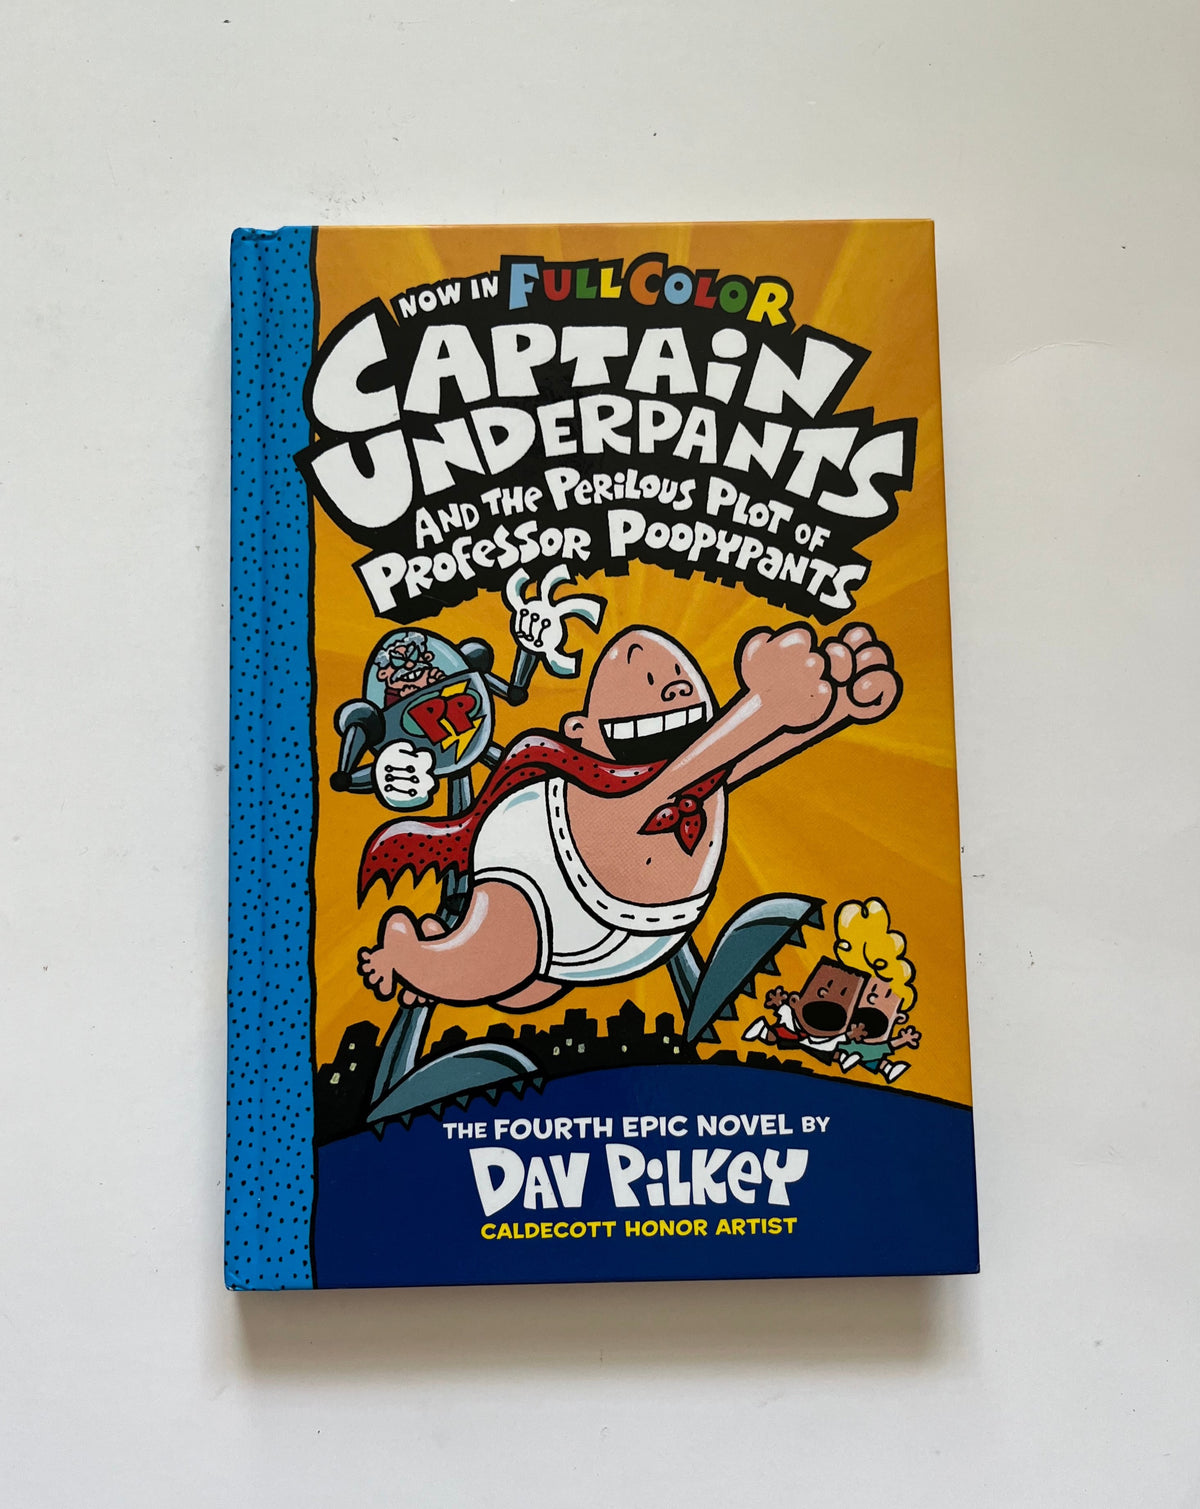 The Adventures of Captain Underpants: and The Perilous Plot of Professor Poopypants by Dav Pilkey